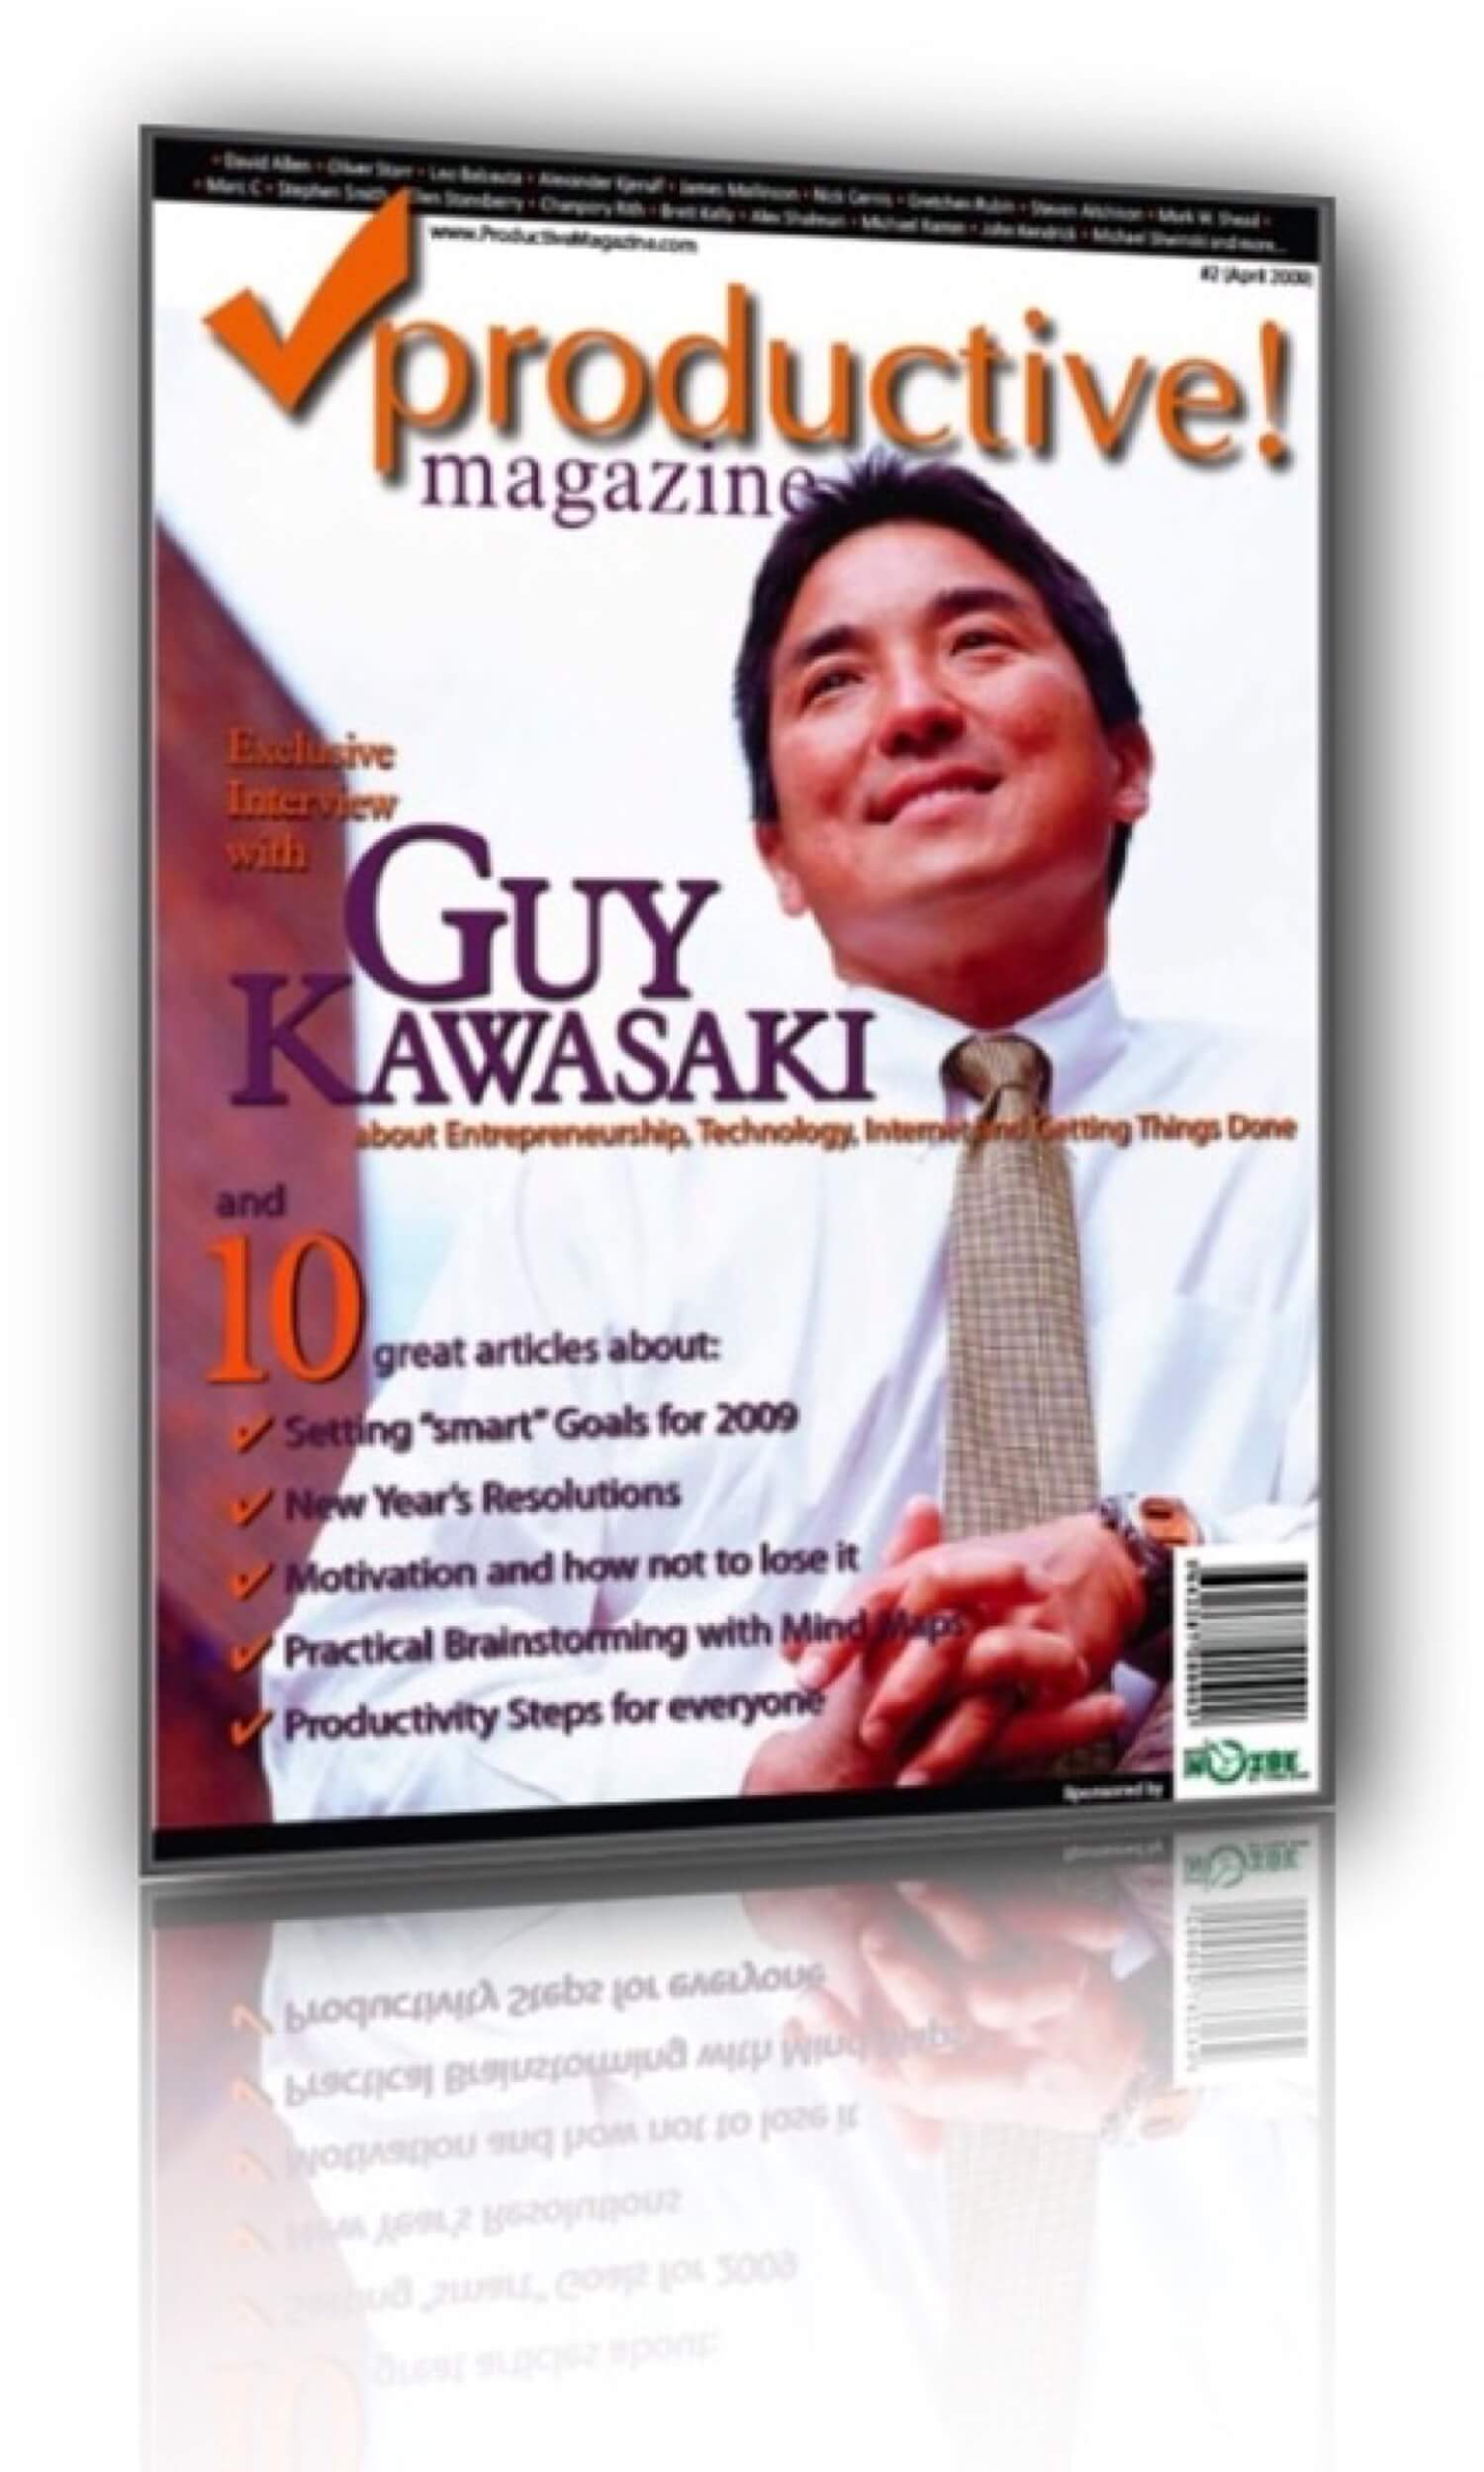 Get your Productive Magazine 2 with Guy Kawasaki and 10 great articles